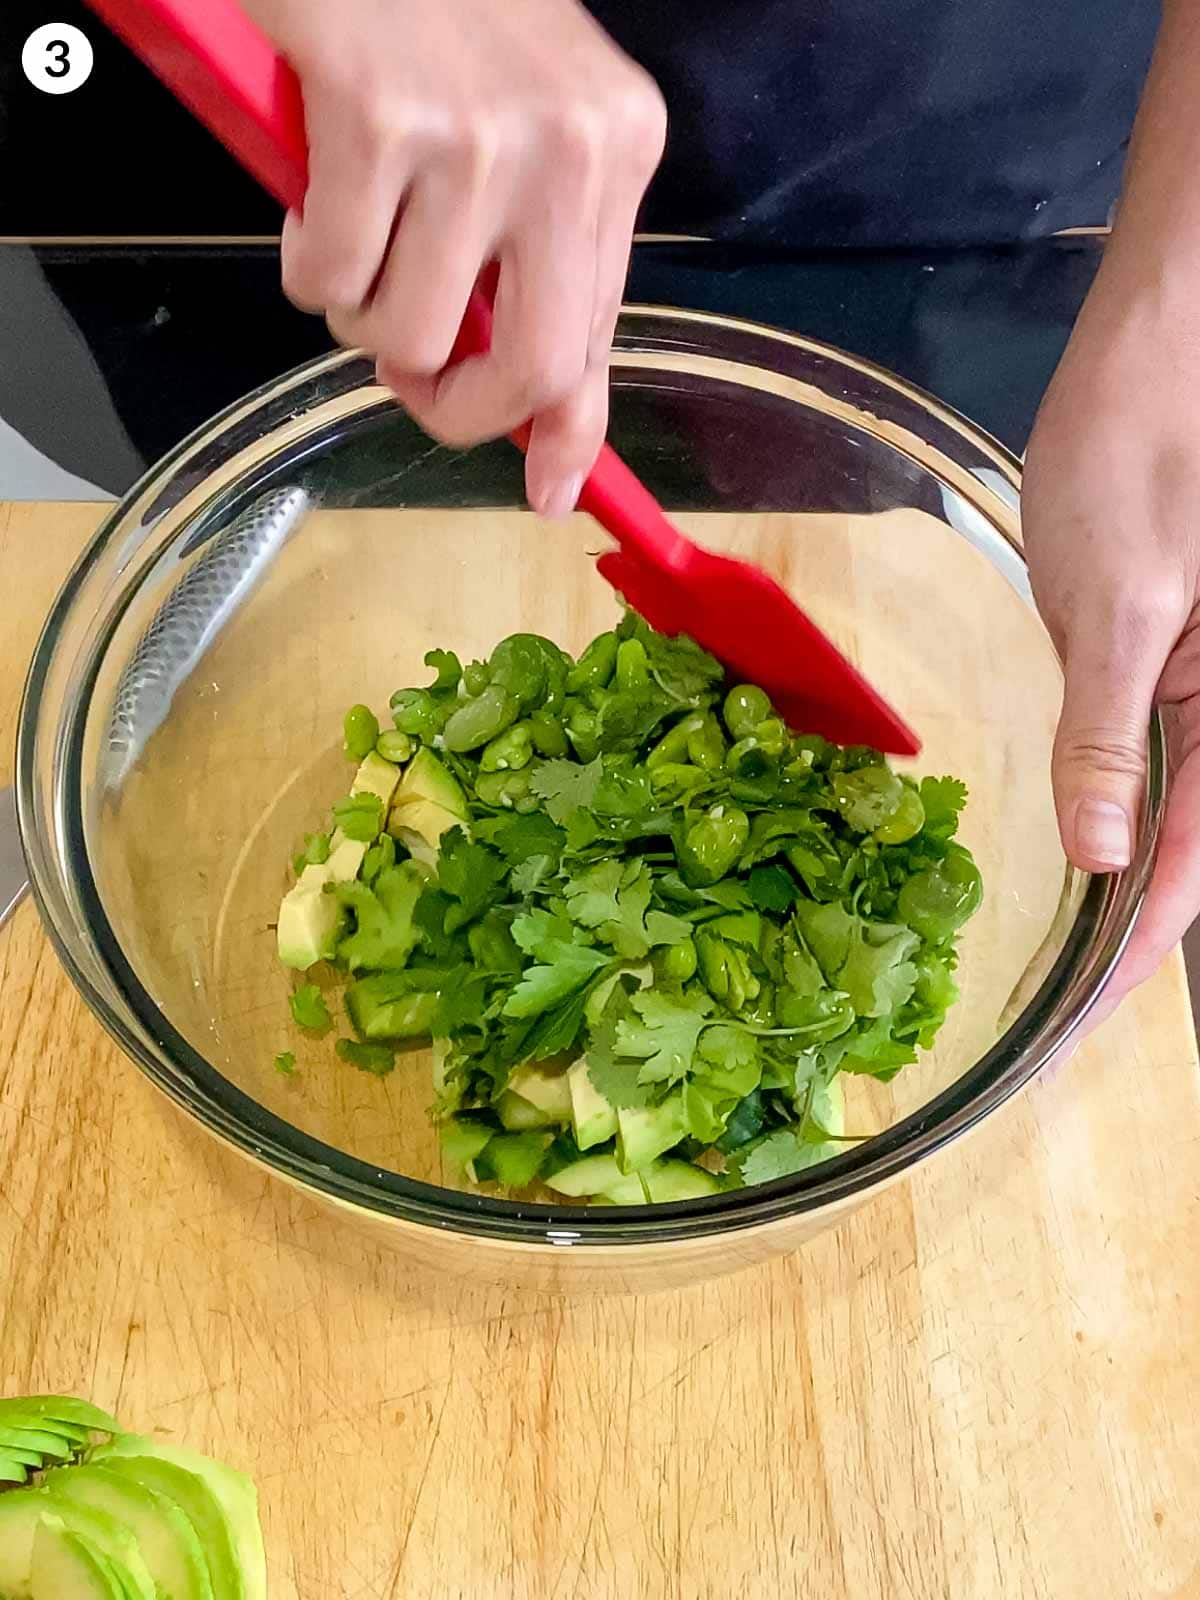 Person mixing ingredients for Creamy Cucumber Avocado Saladin a mixing bowl